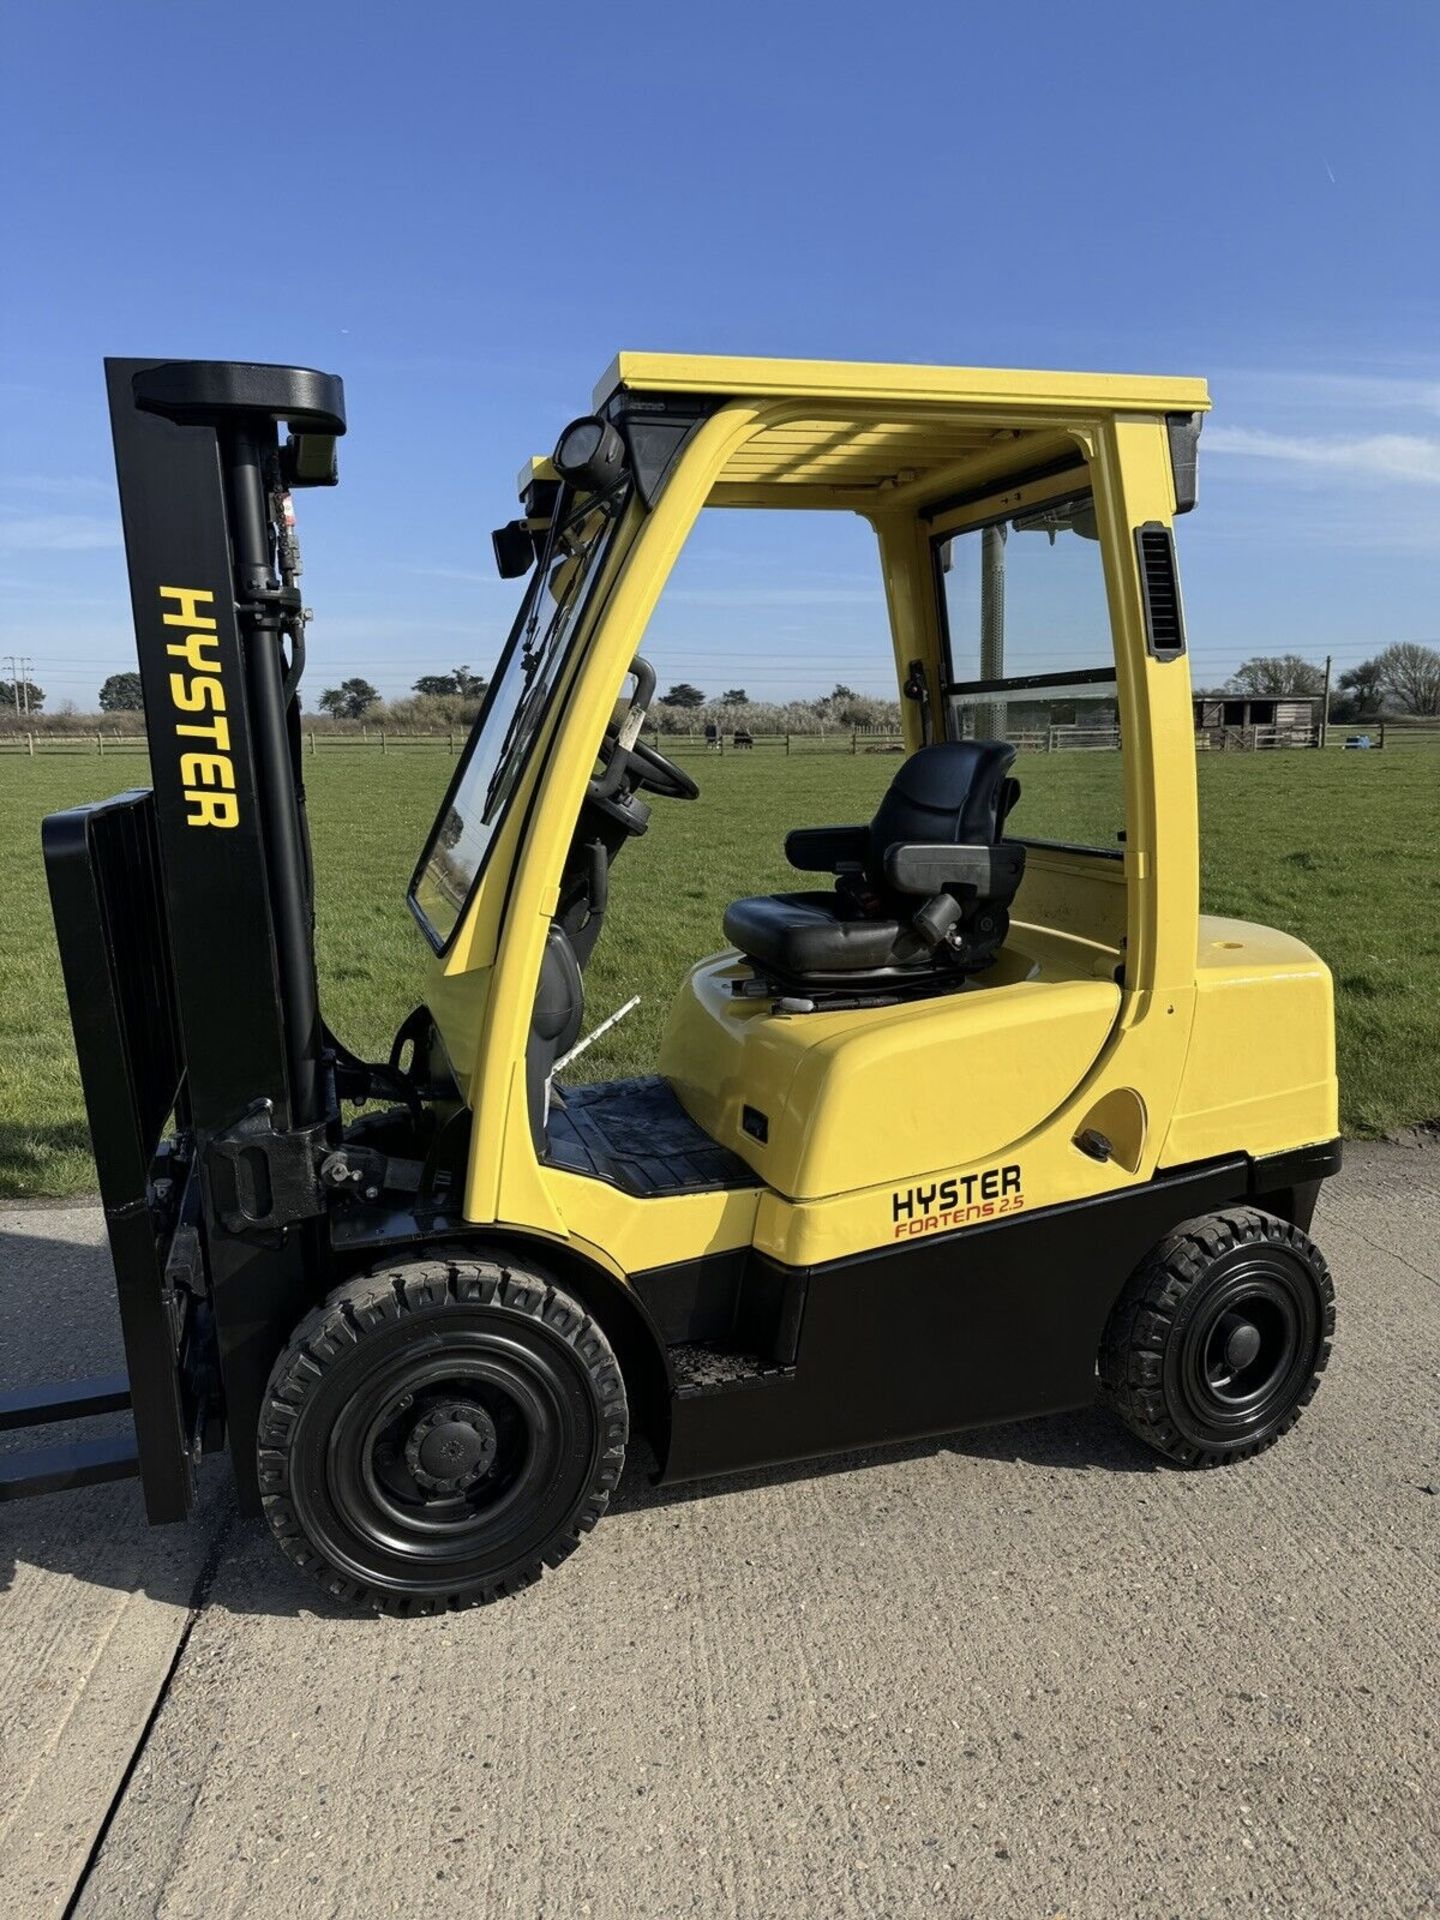 2008 - HYSTER, 2.5 Tonne Diesel Forklift (Container Spec) - Image 4 of 5